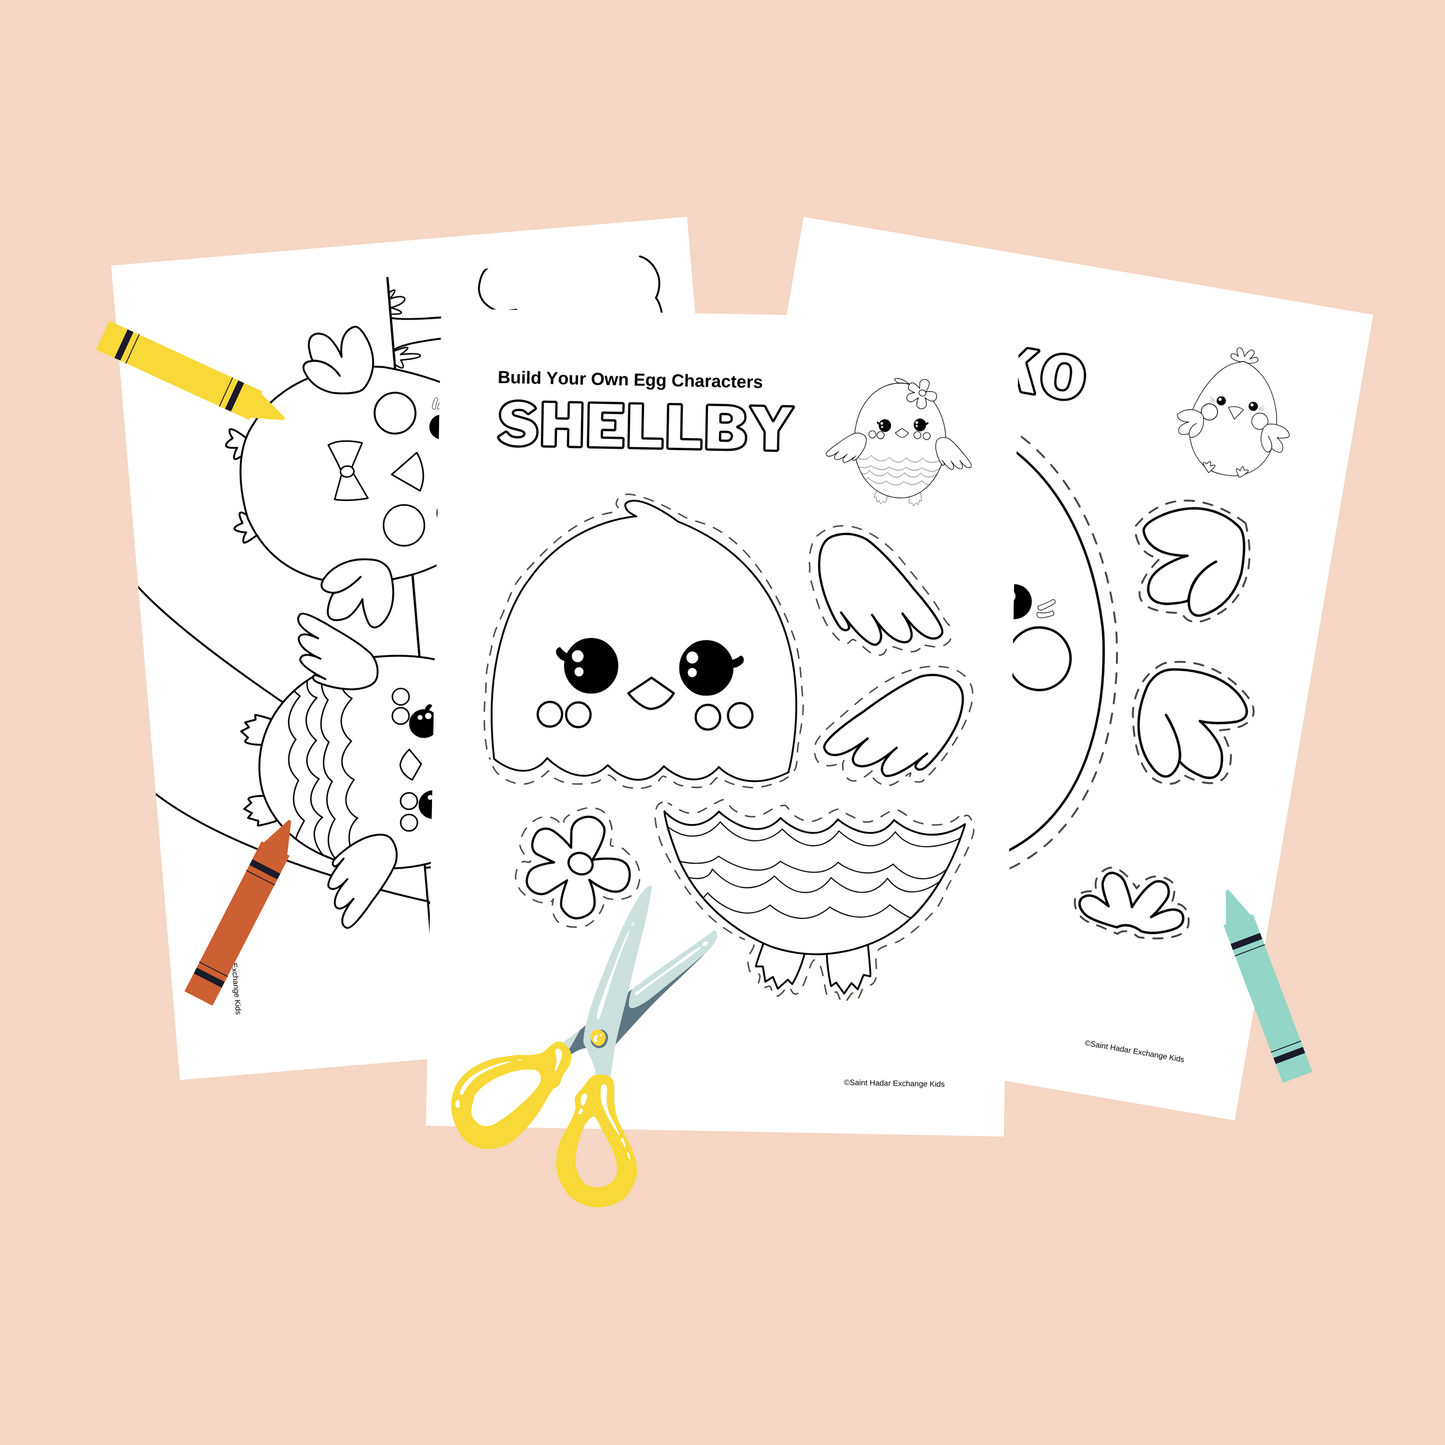 Egg-citing Easter Fun Pack for Kids with Build Your Own Egg Characters & Coloring Pages